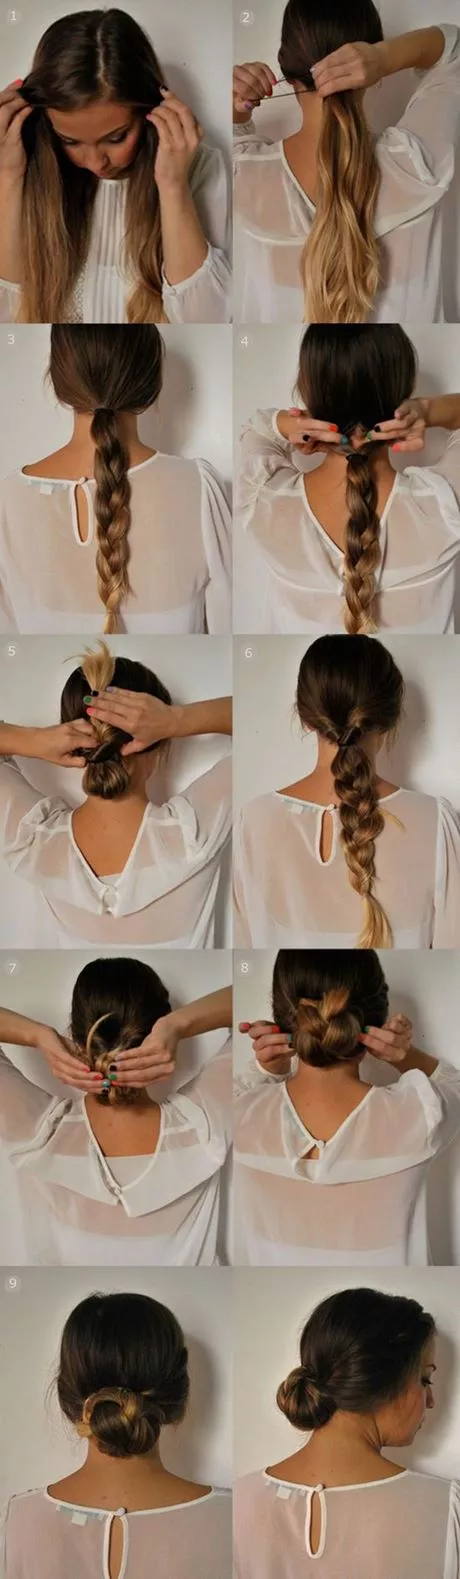 Pretty and simple hairstyles pretty-and-simple-hairstyles-98_8-16-16